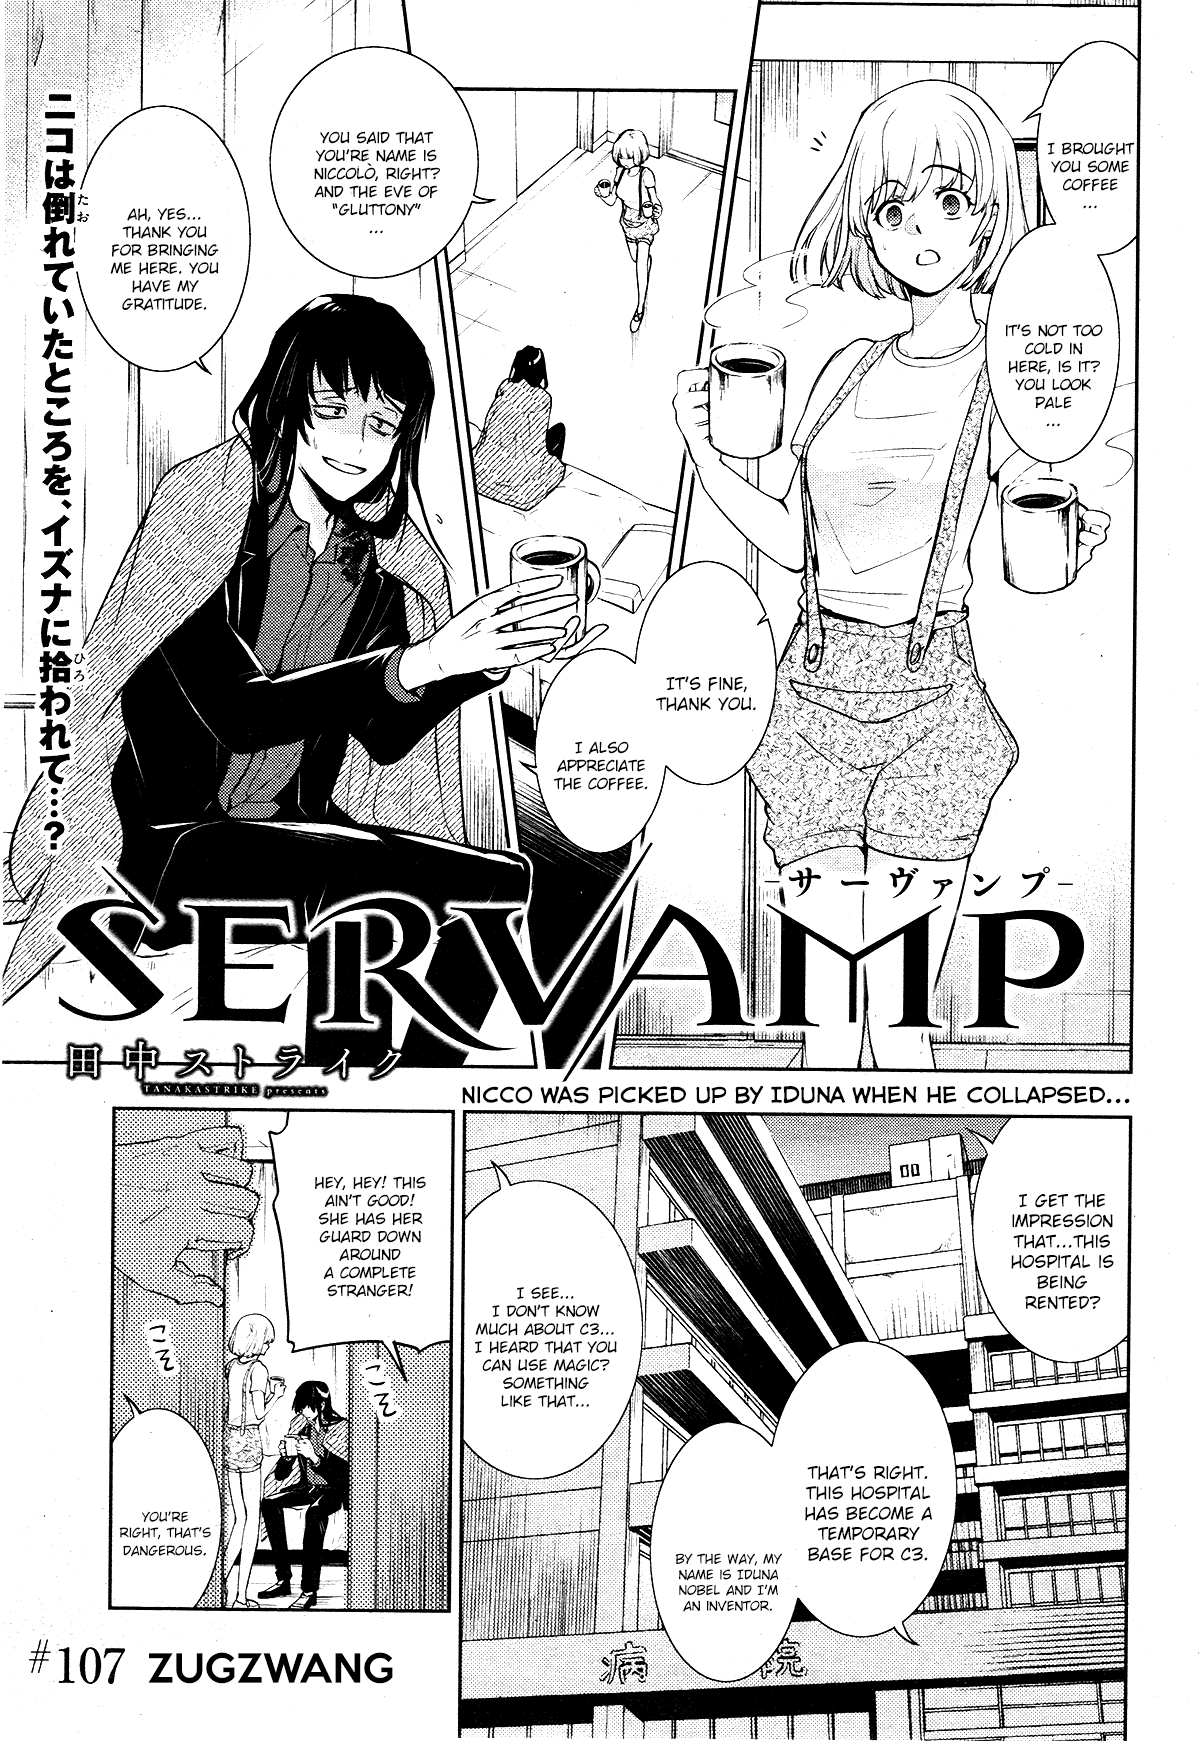 Servamp Chapter 107: Zugzwang - Picture 1